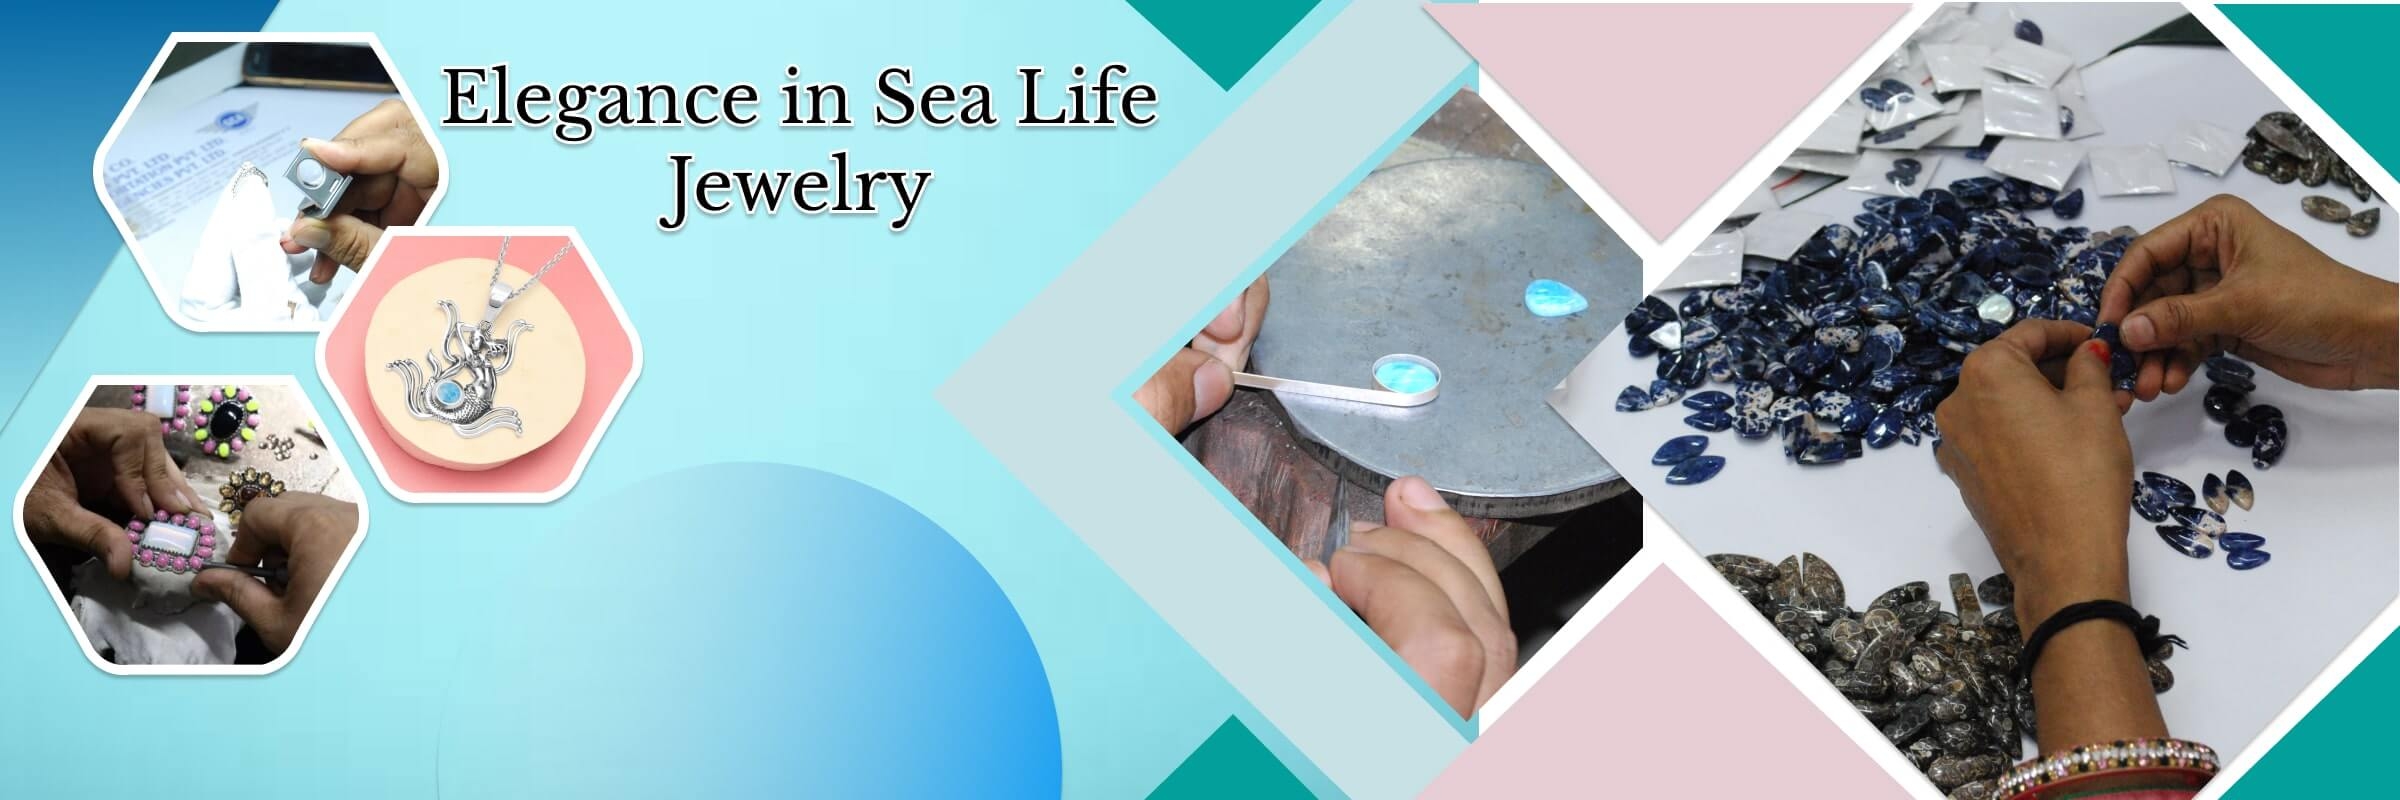 Why Choose Sea Life Jewelry Over Other Options?